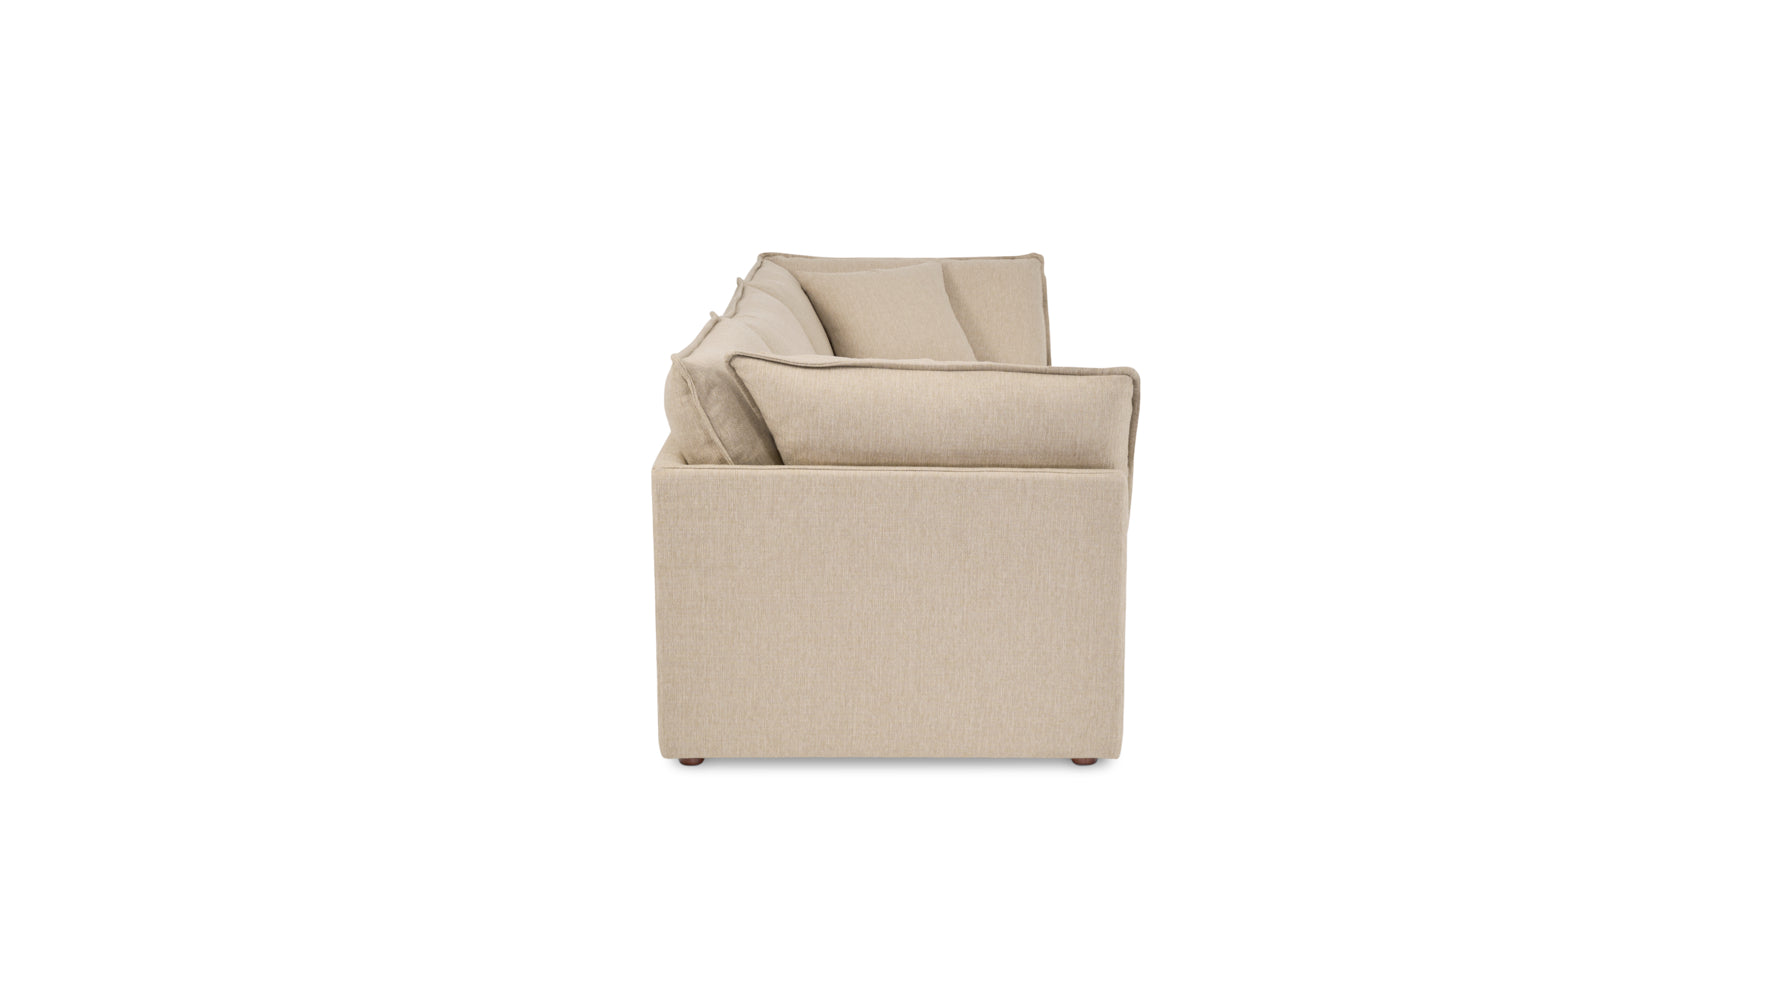 Chill Time 3-Piece Modular Sofa, Biscuit - Image 3